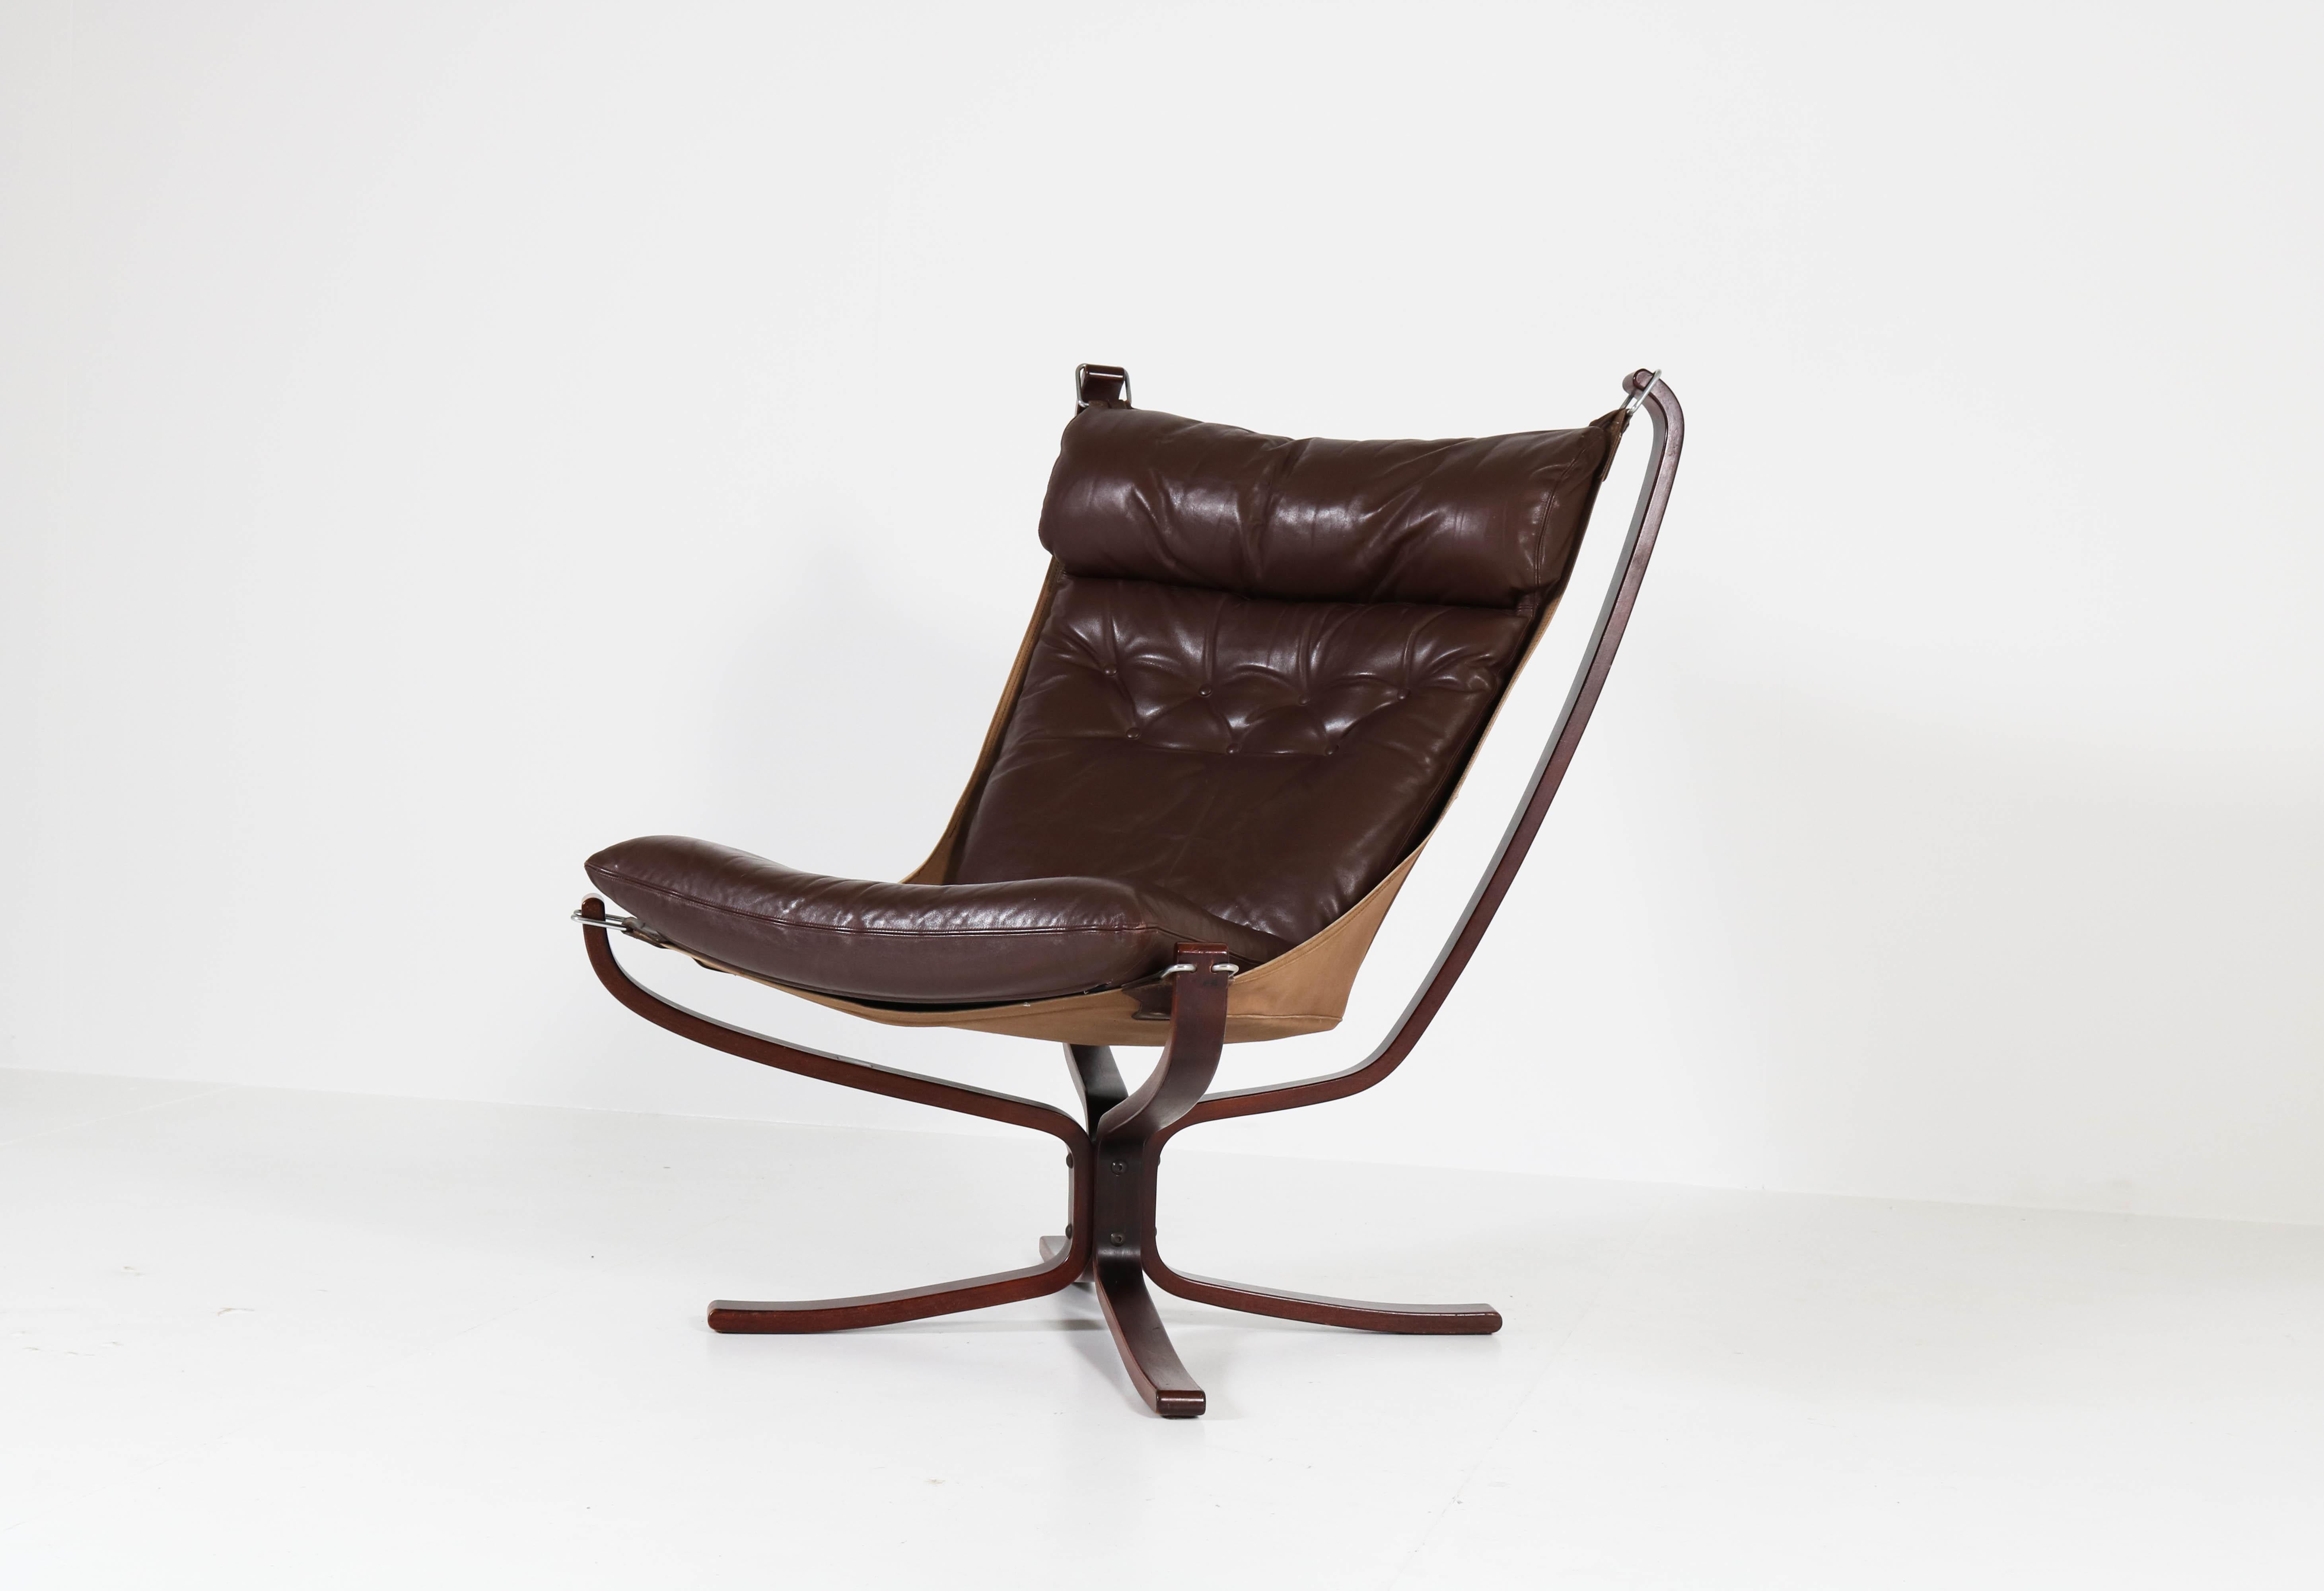 Norwegian Mid-Century Modern Falcon Chair by Sigurd Ressell for Vatne Møbler Norway, 1970s